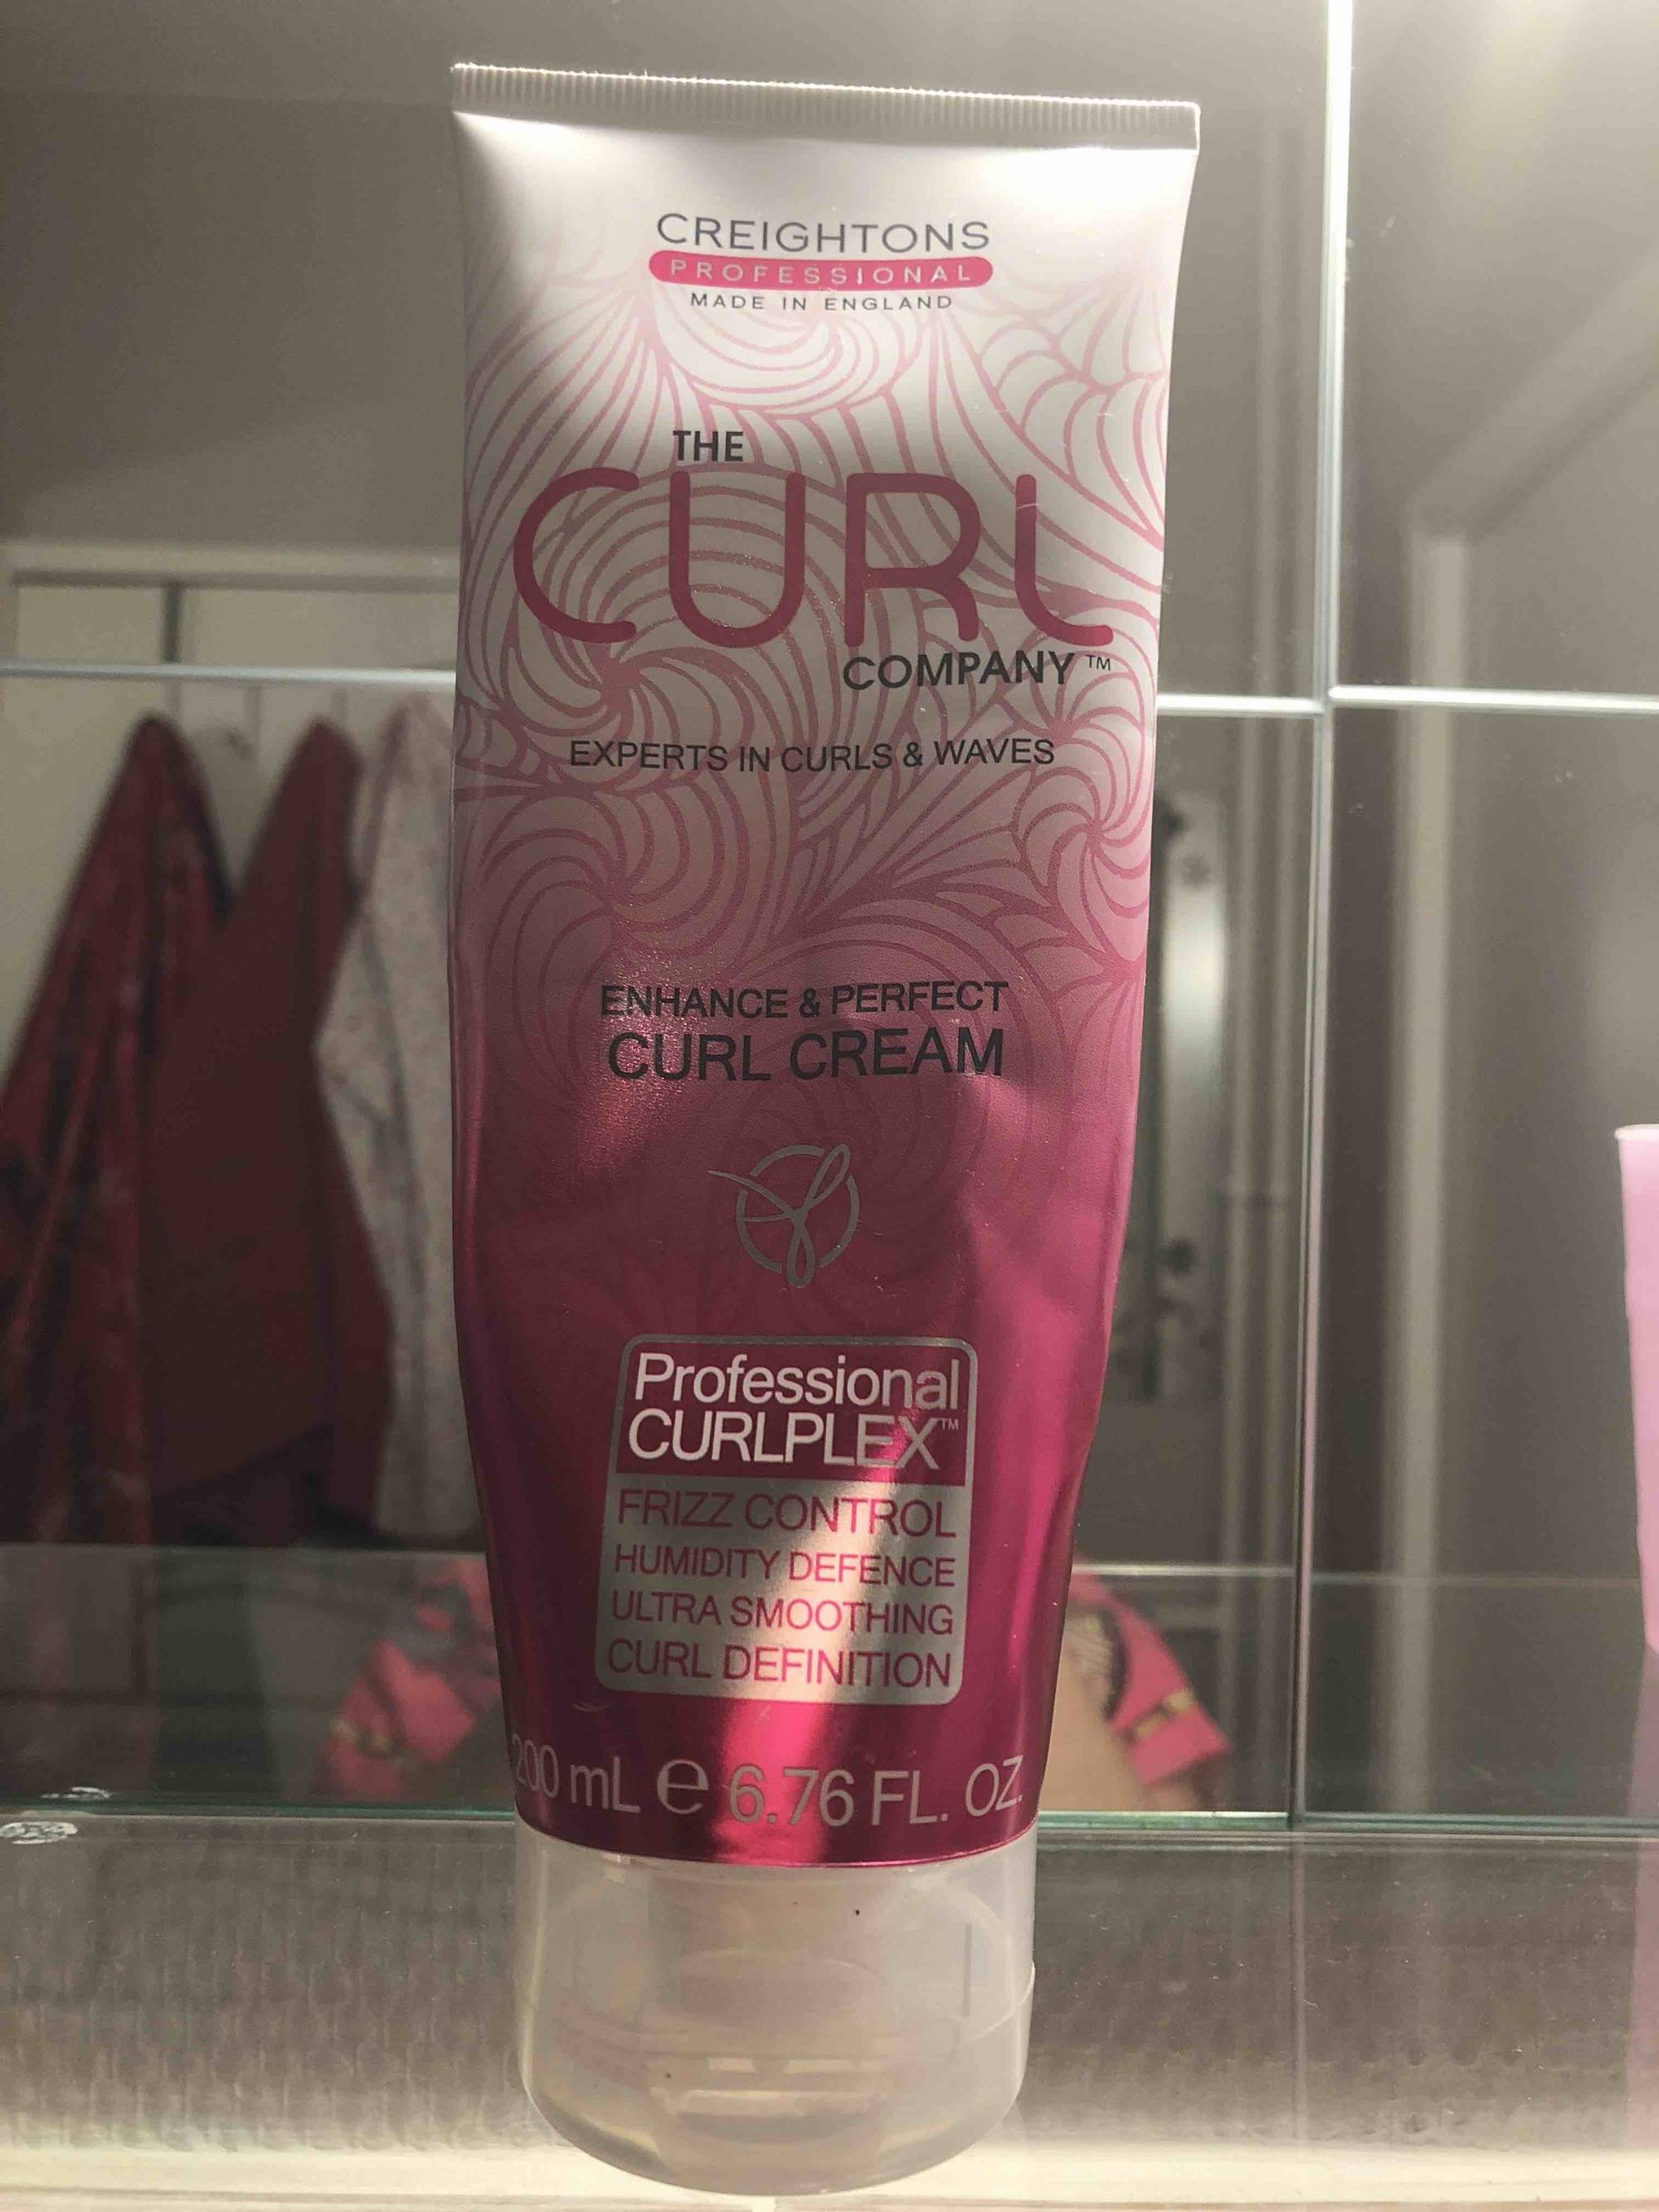 CREIGHTONS PROFESSIONAL - The curl company - Enhance & perfect curl cream